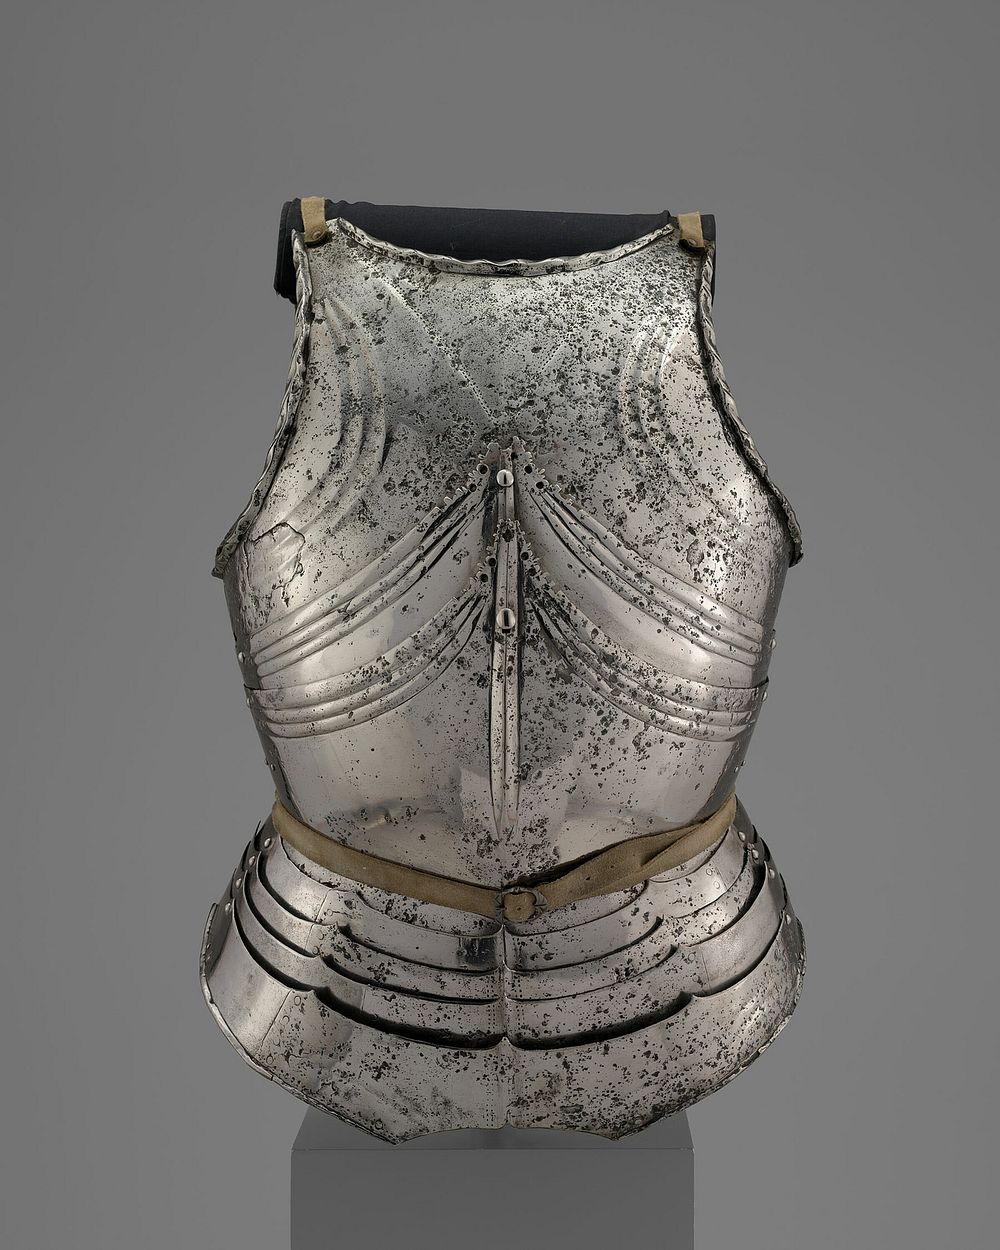 Cuirass (Breastplate and Backplate) in the Late Gothic Style